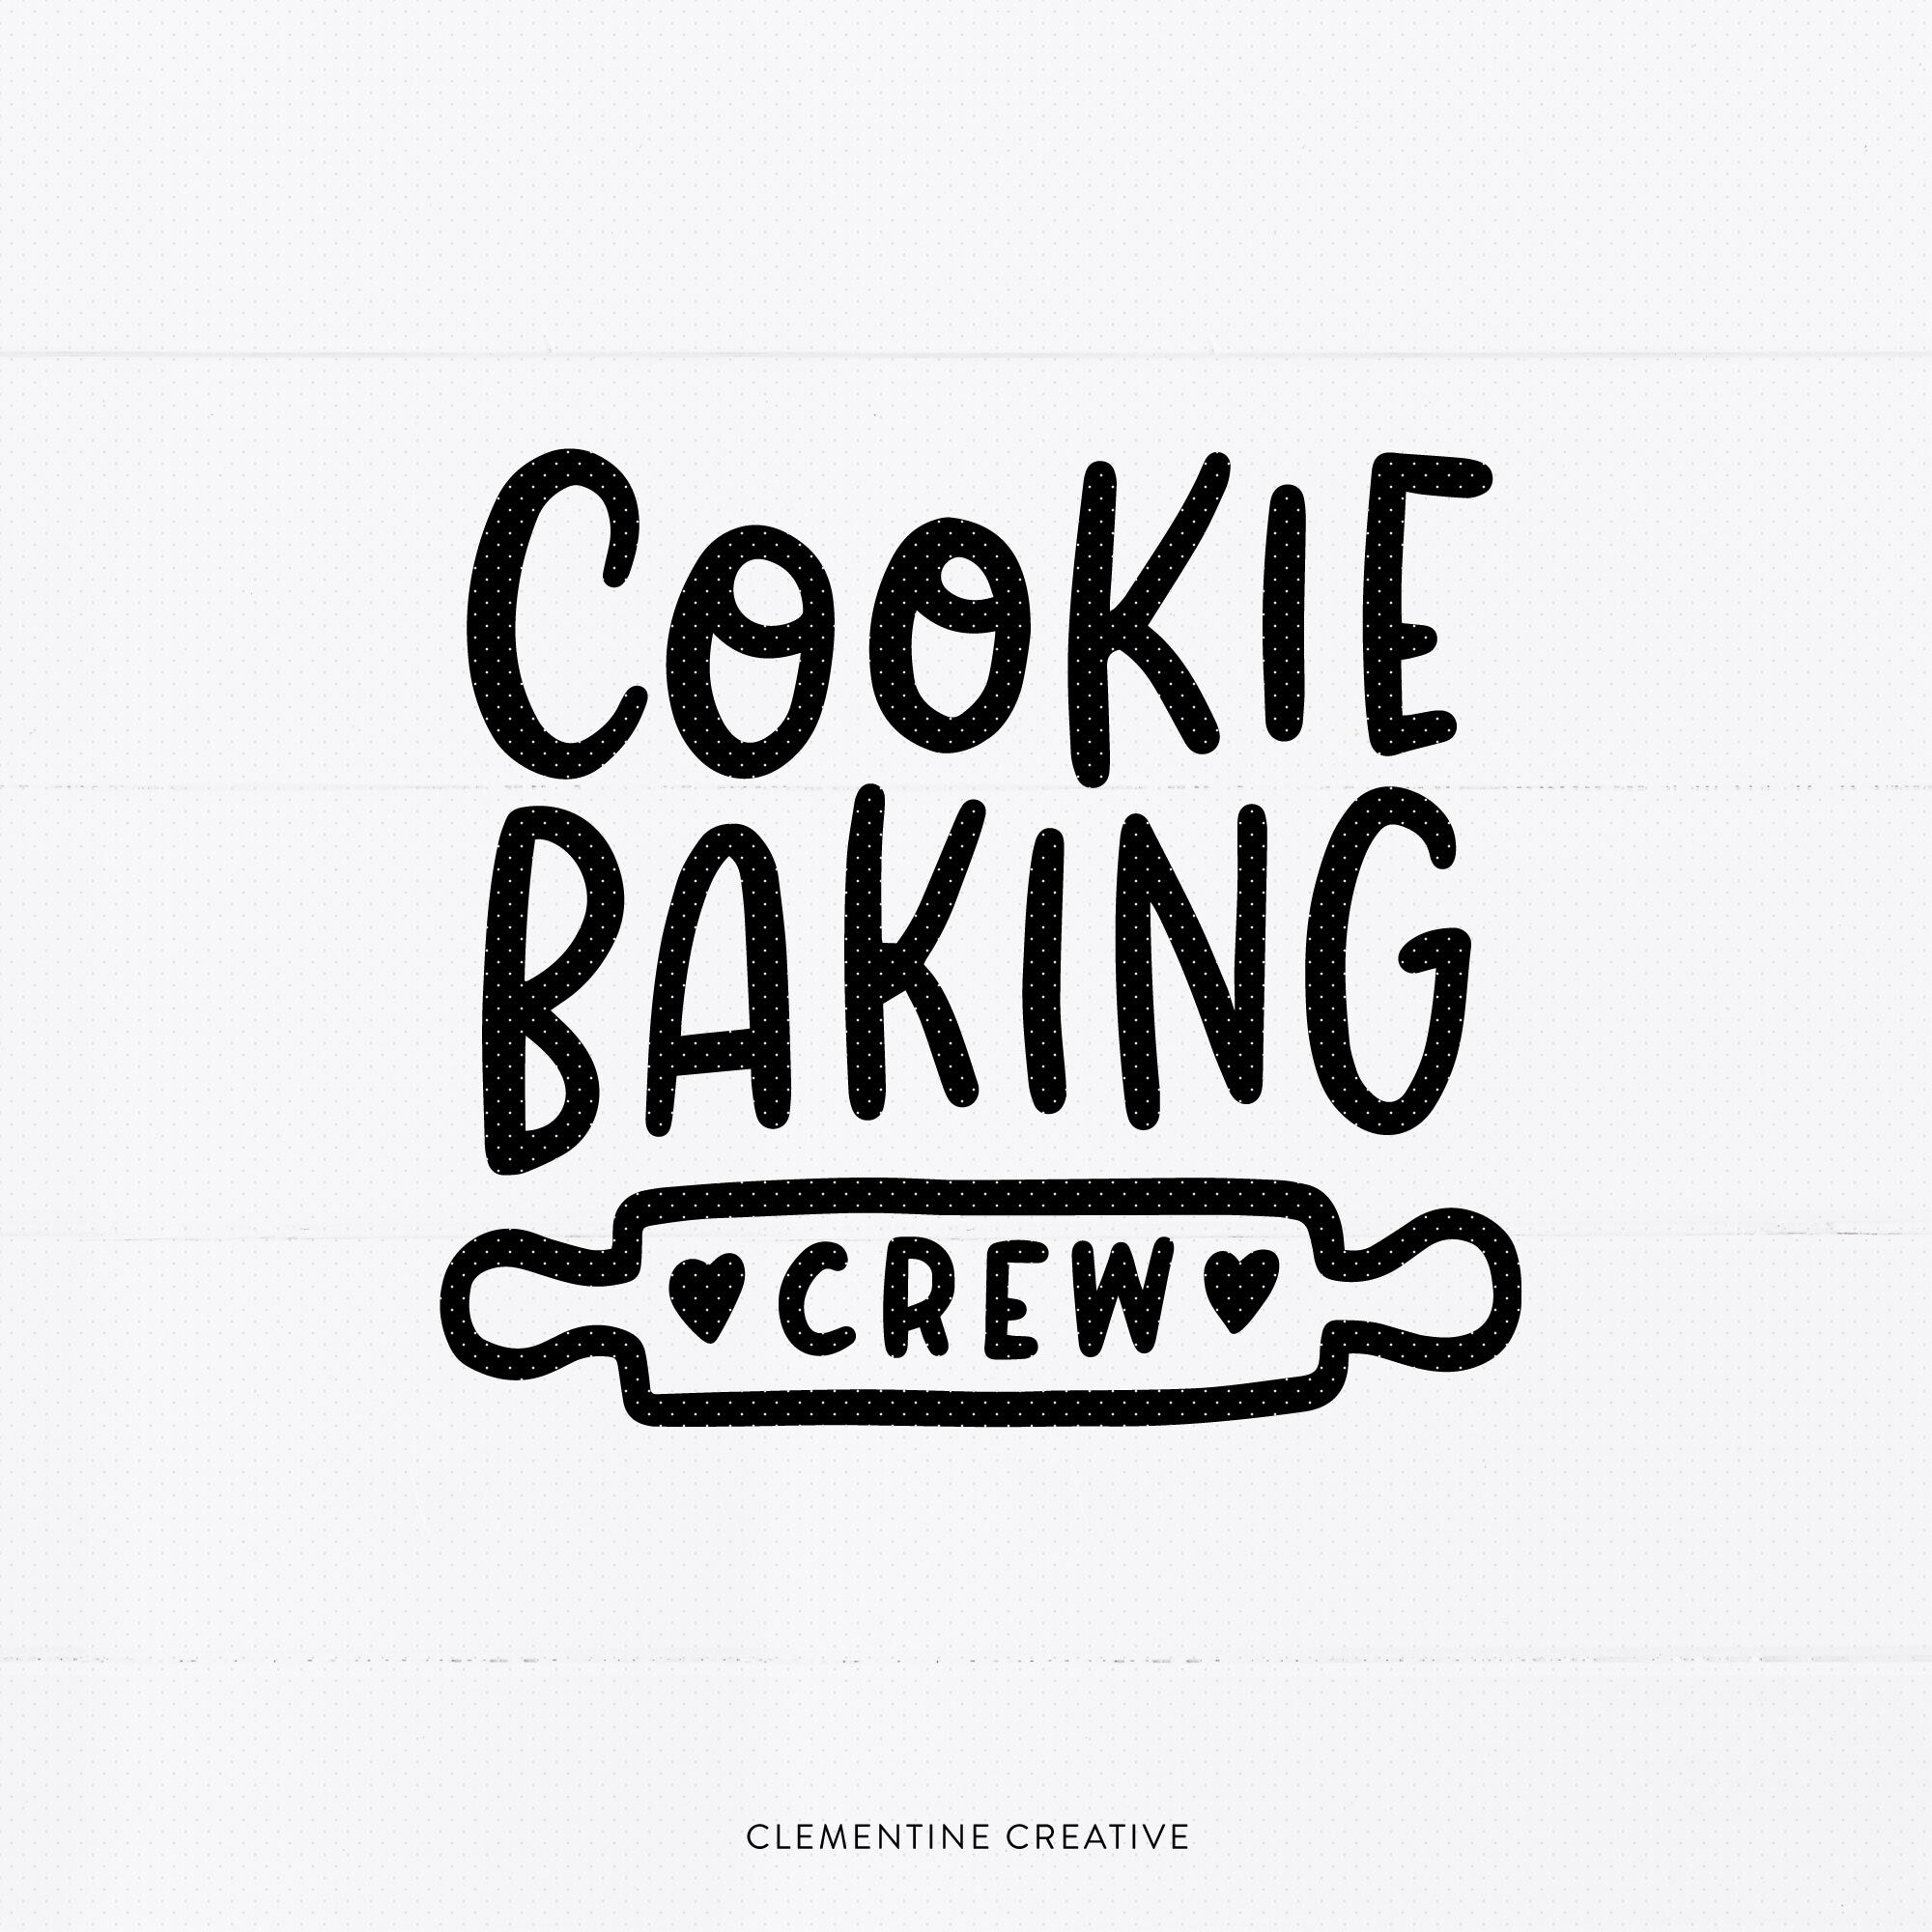 Cookie Baking Crew Svg Christmas Baking Svg Christmas T Shirt Svg By Clementine Creative Thehungryjpeg Com